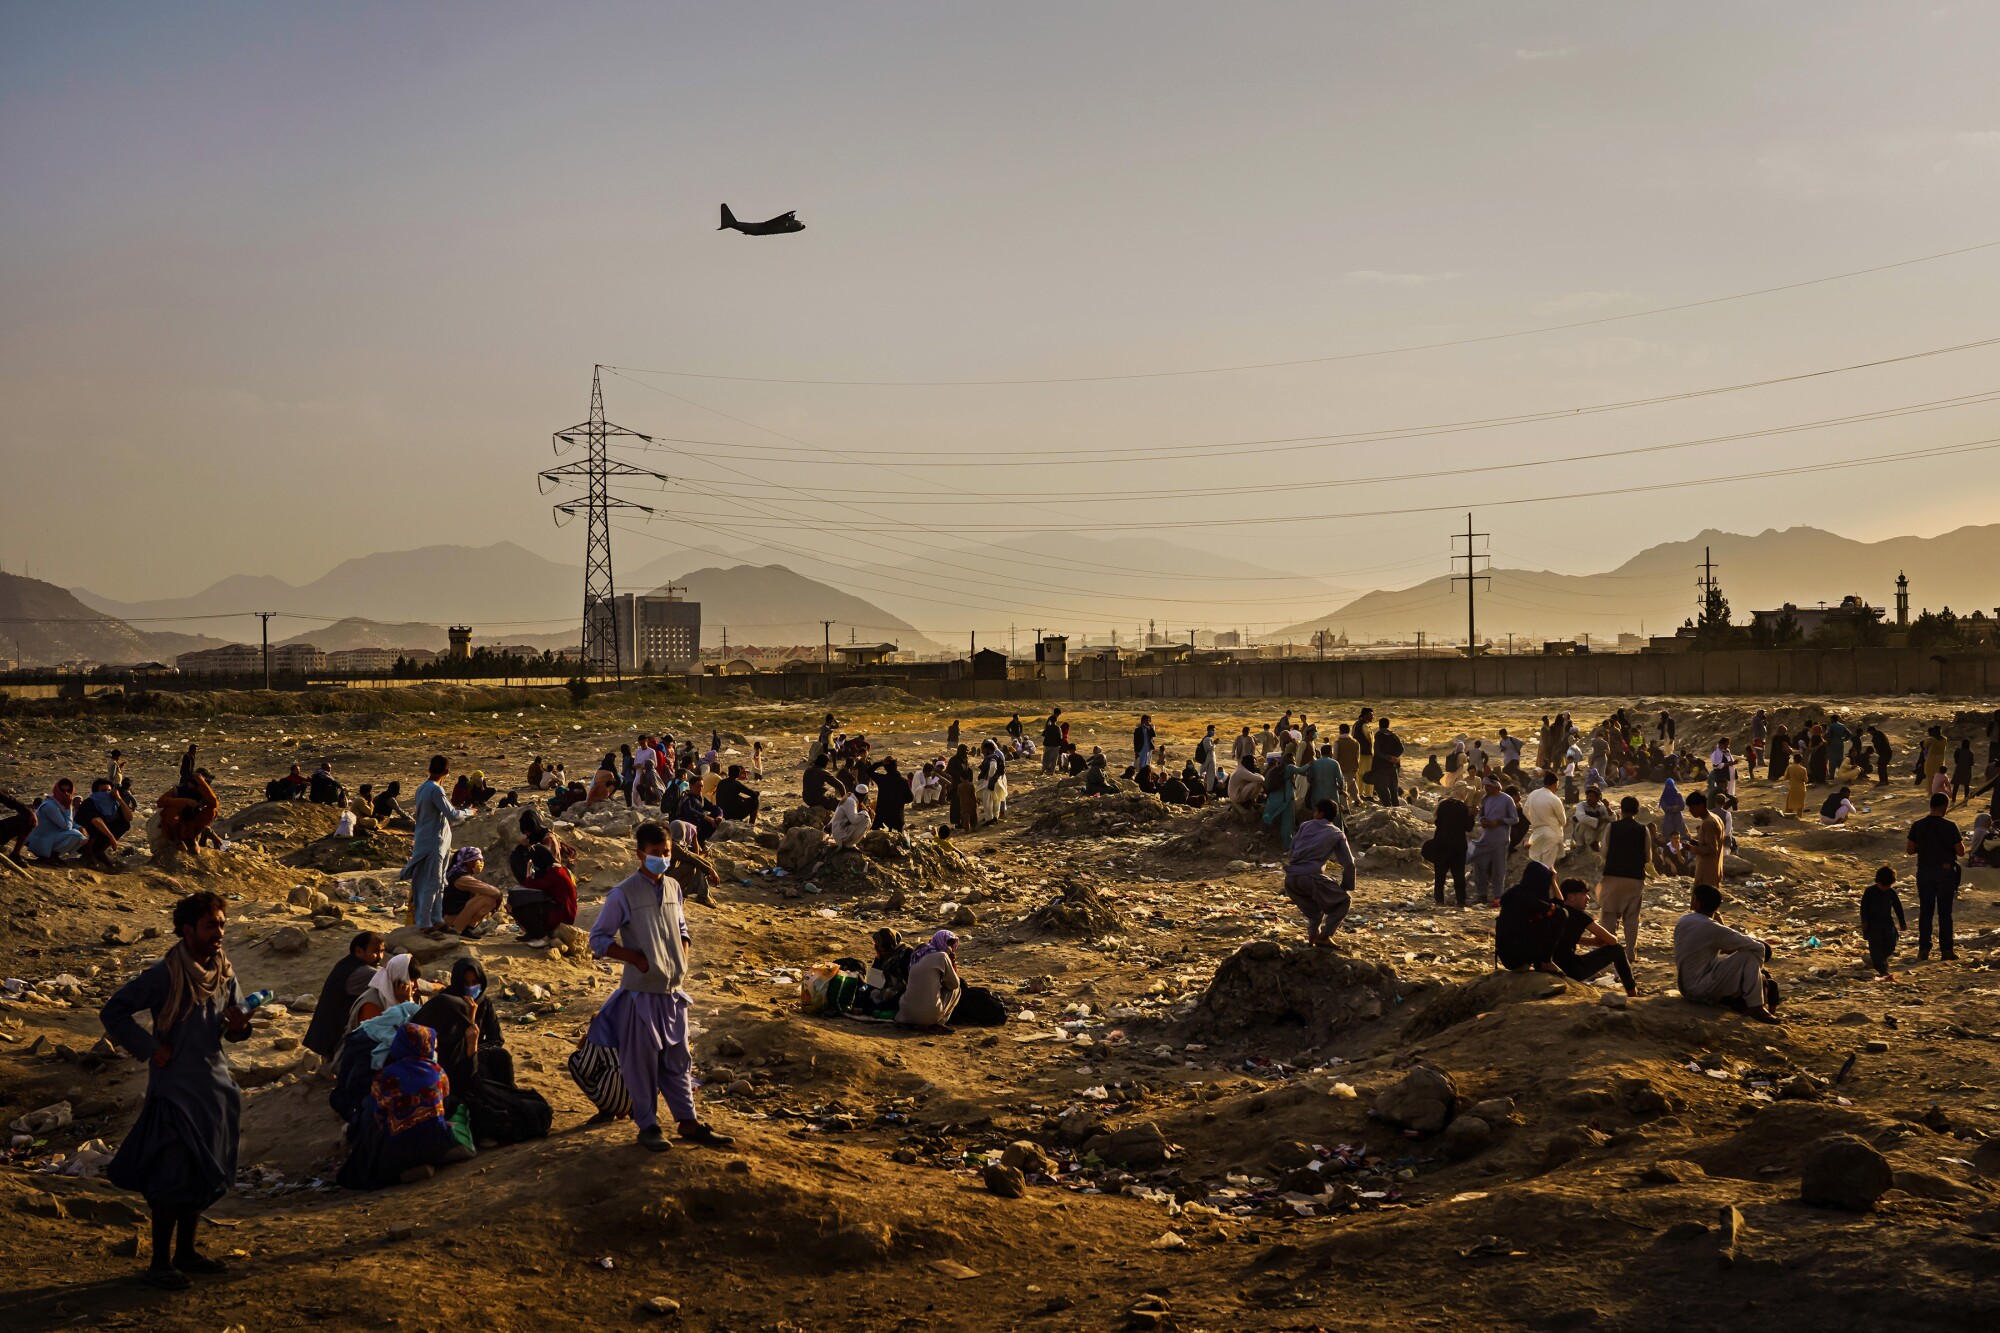 A military transport plane departs as Afghans stand in a field below.